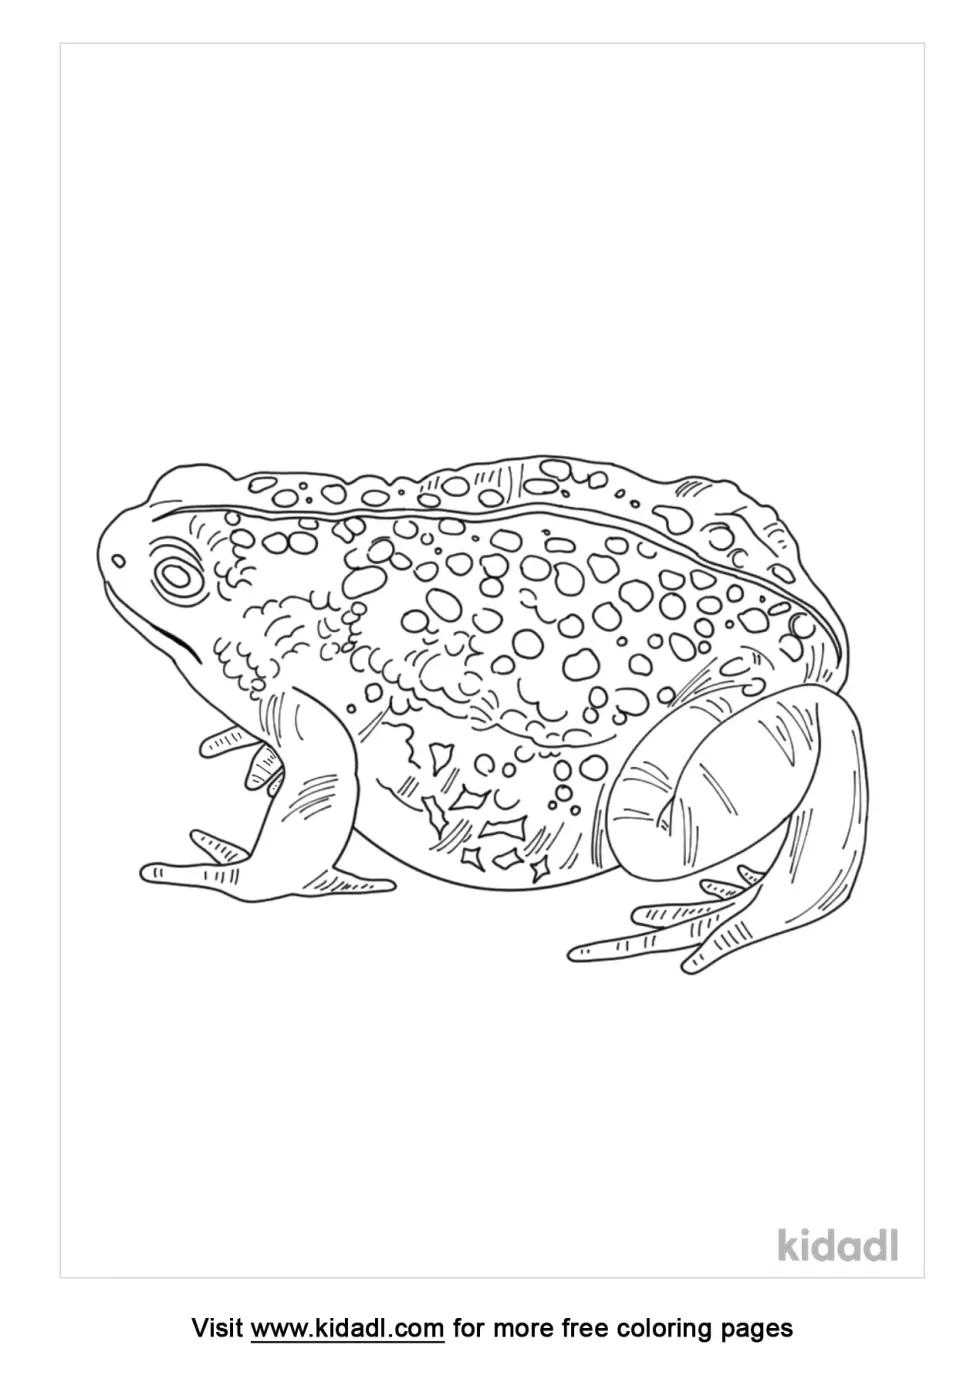 Natterjack Toad Coloring Page